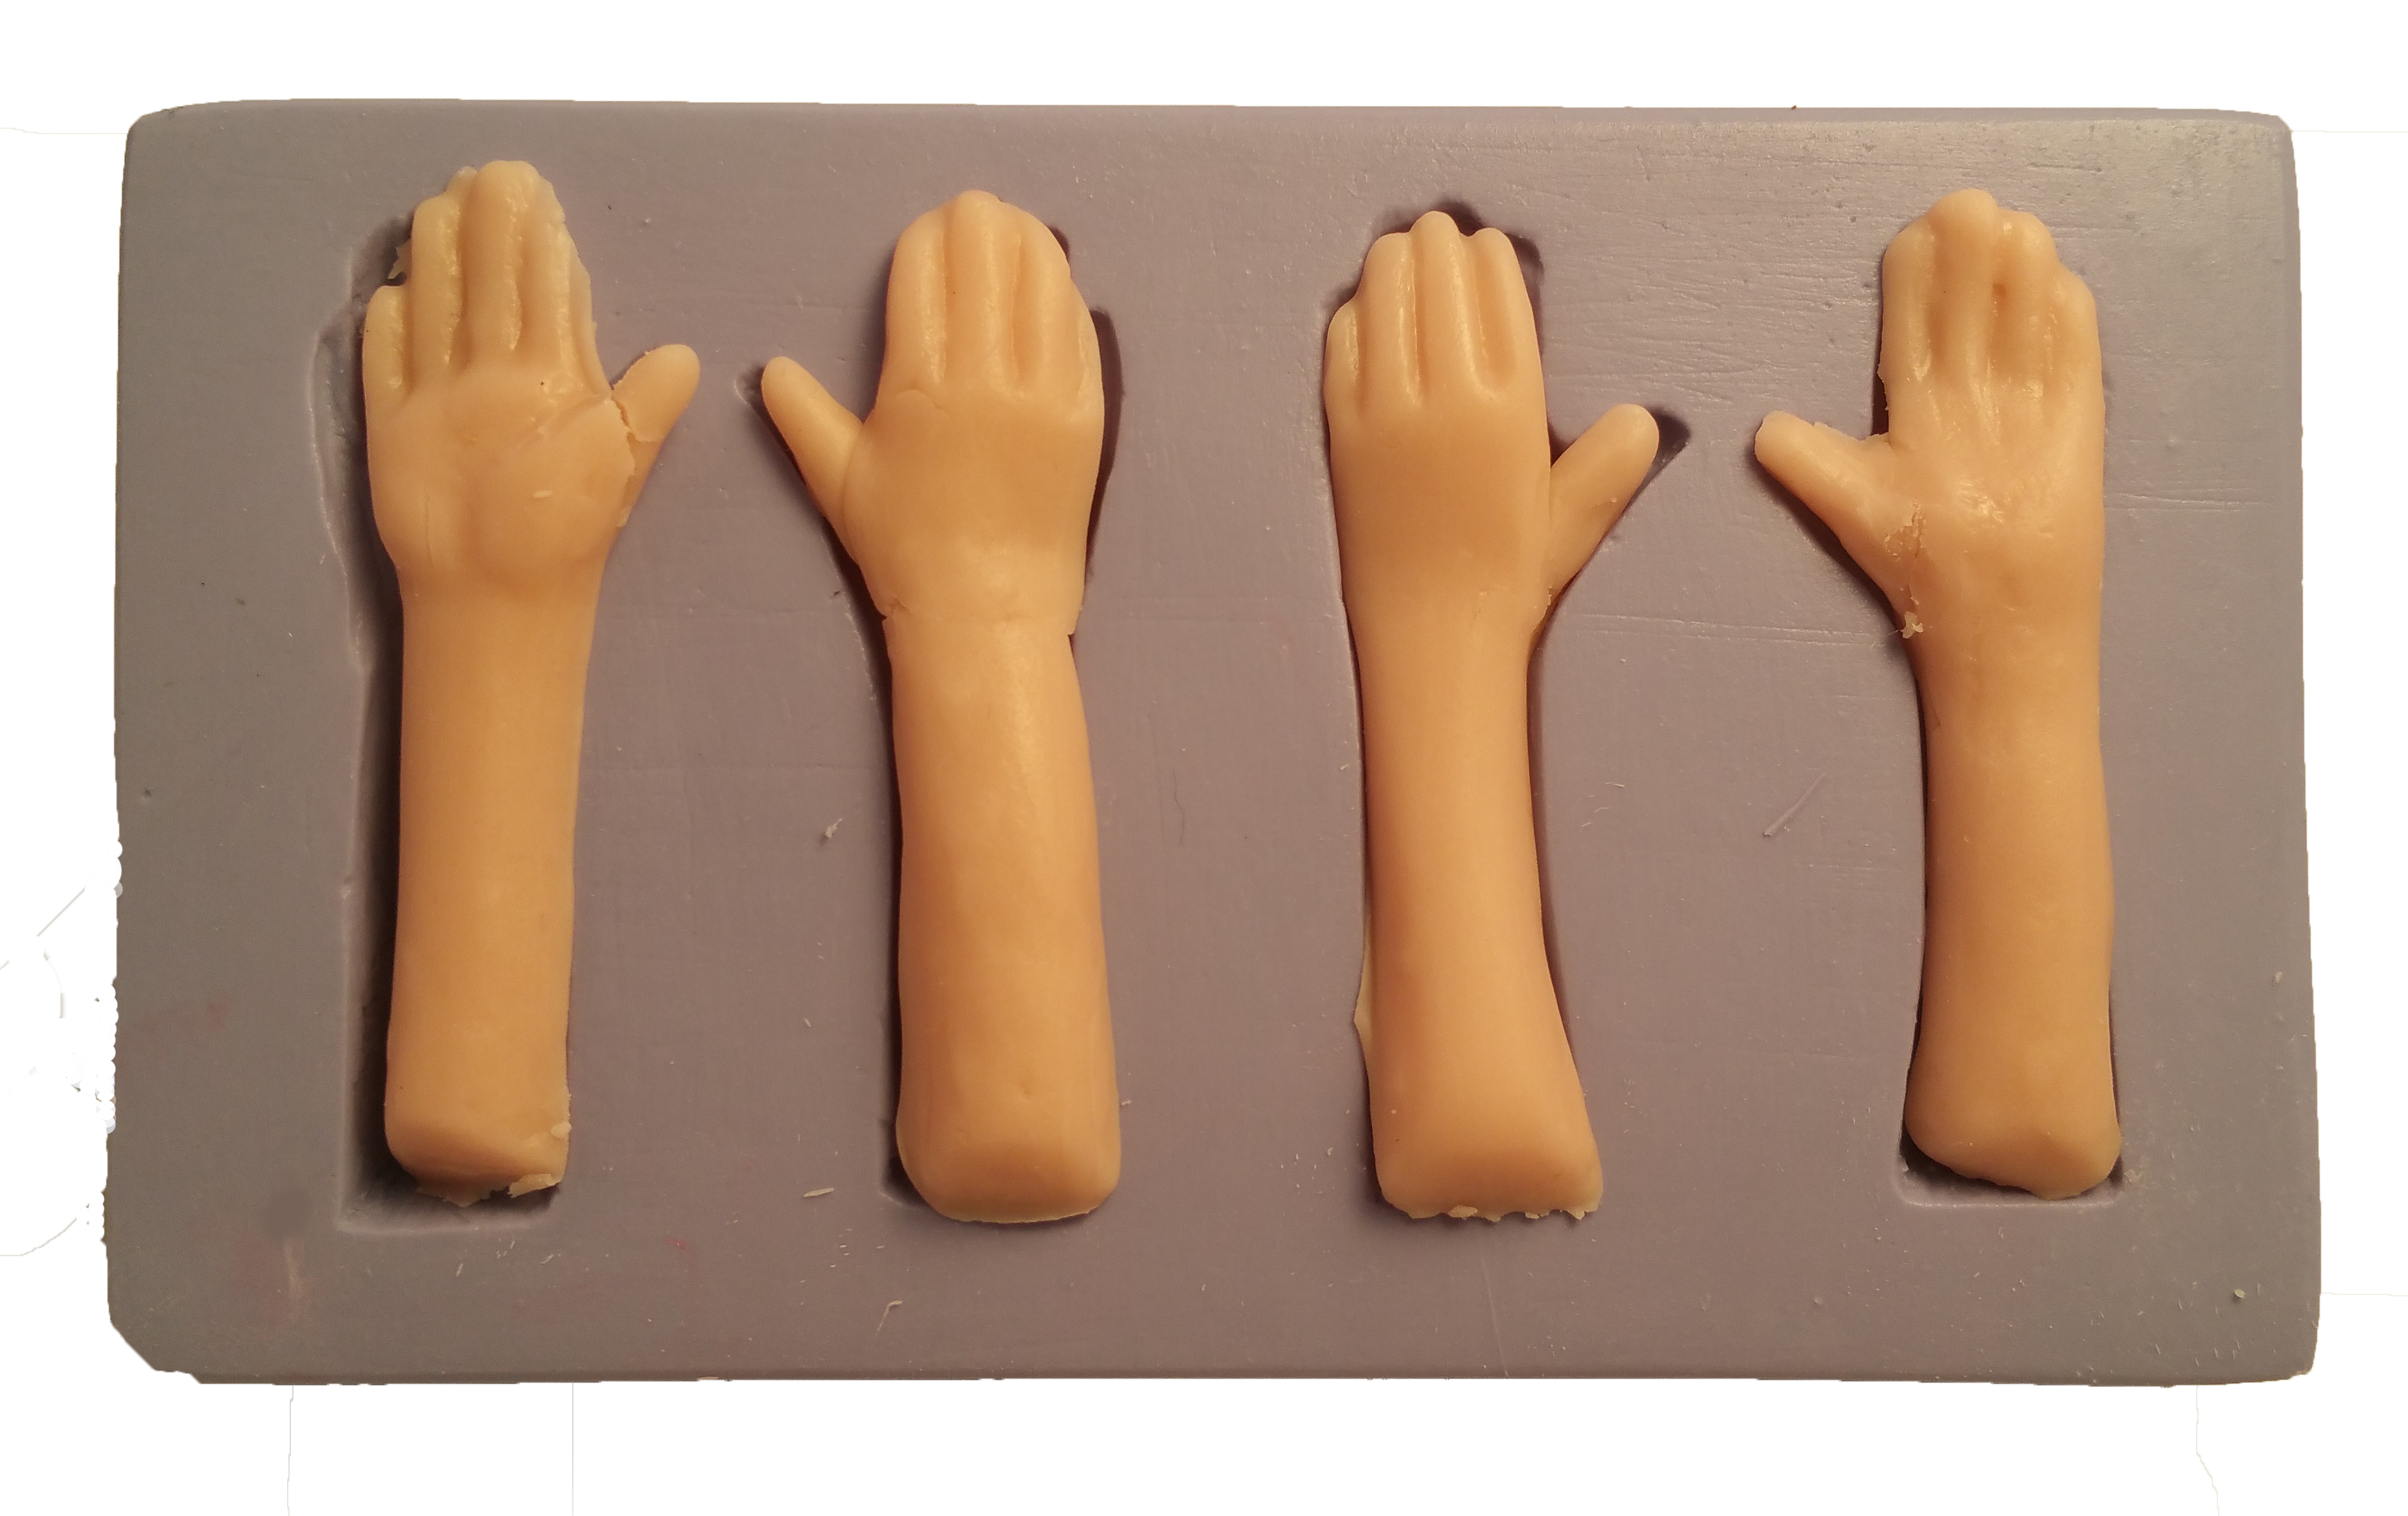 Flexible Silicone Doll Hands Push Mold - White Gothic Studios